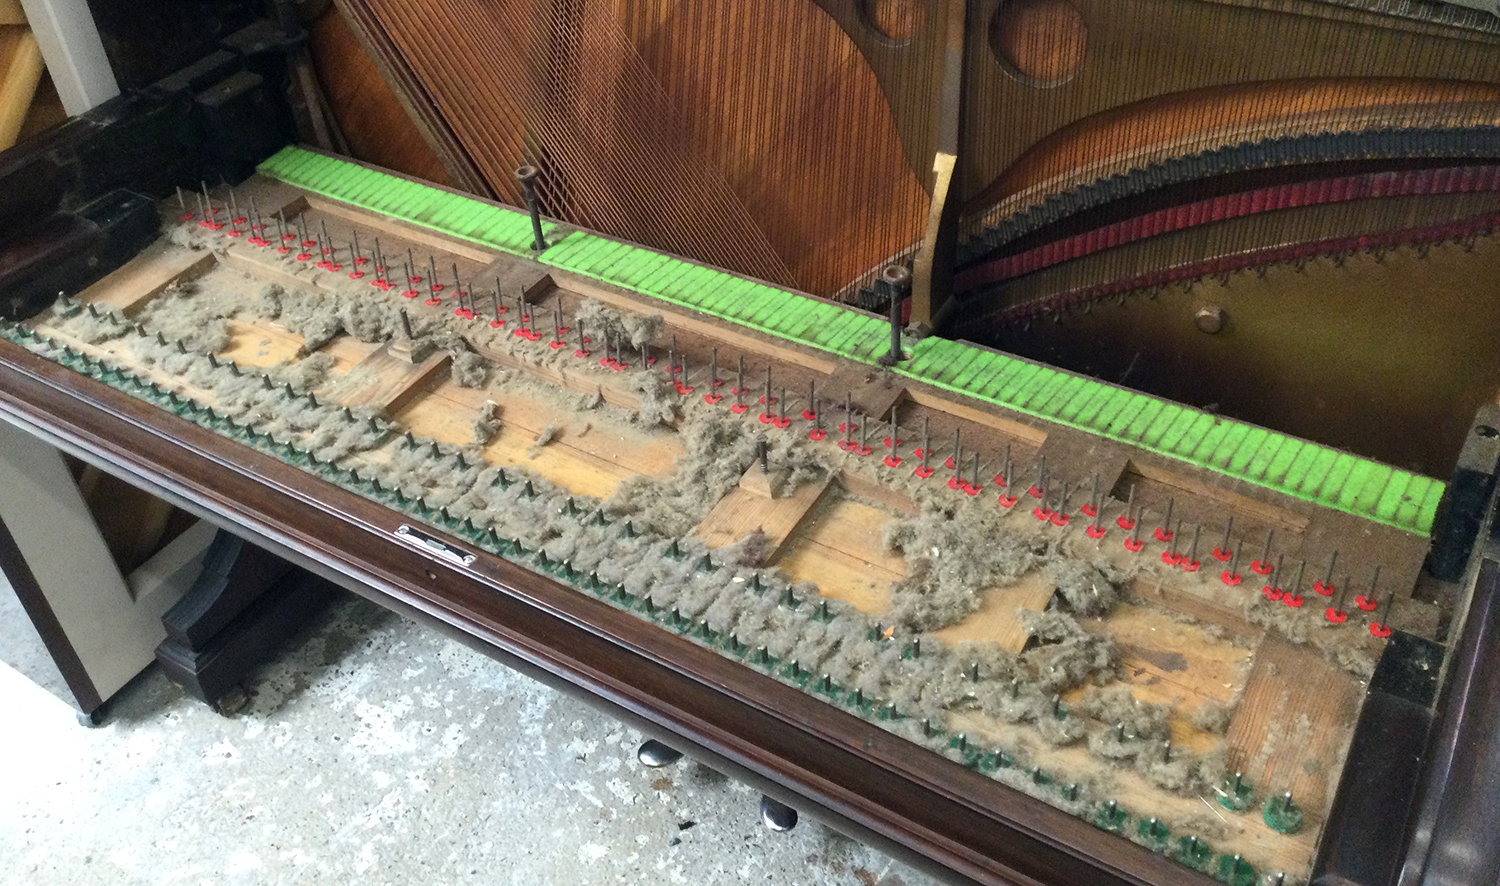 Piano before cleaning - with fluff